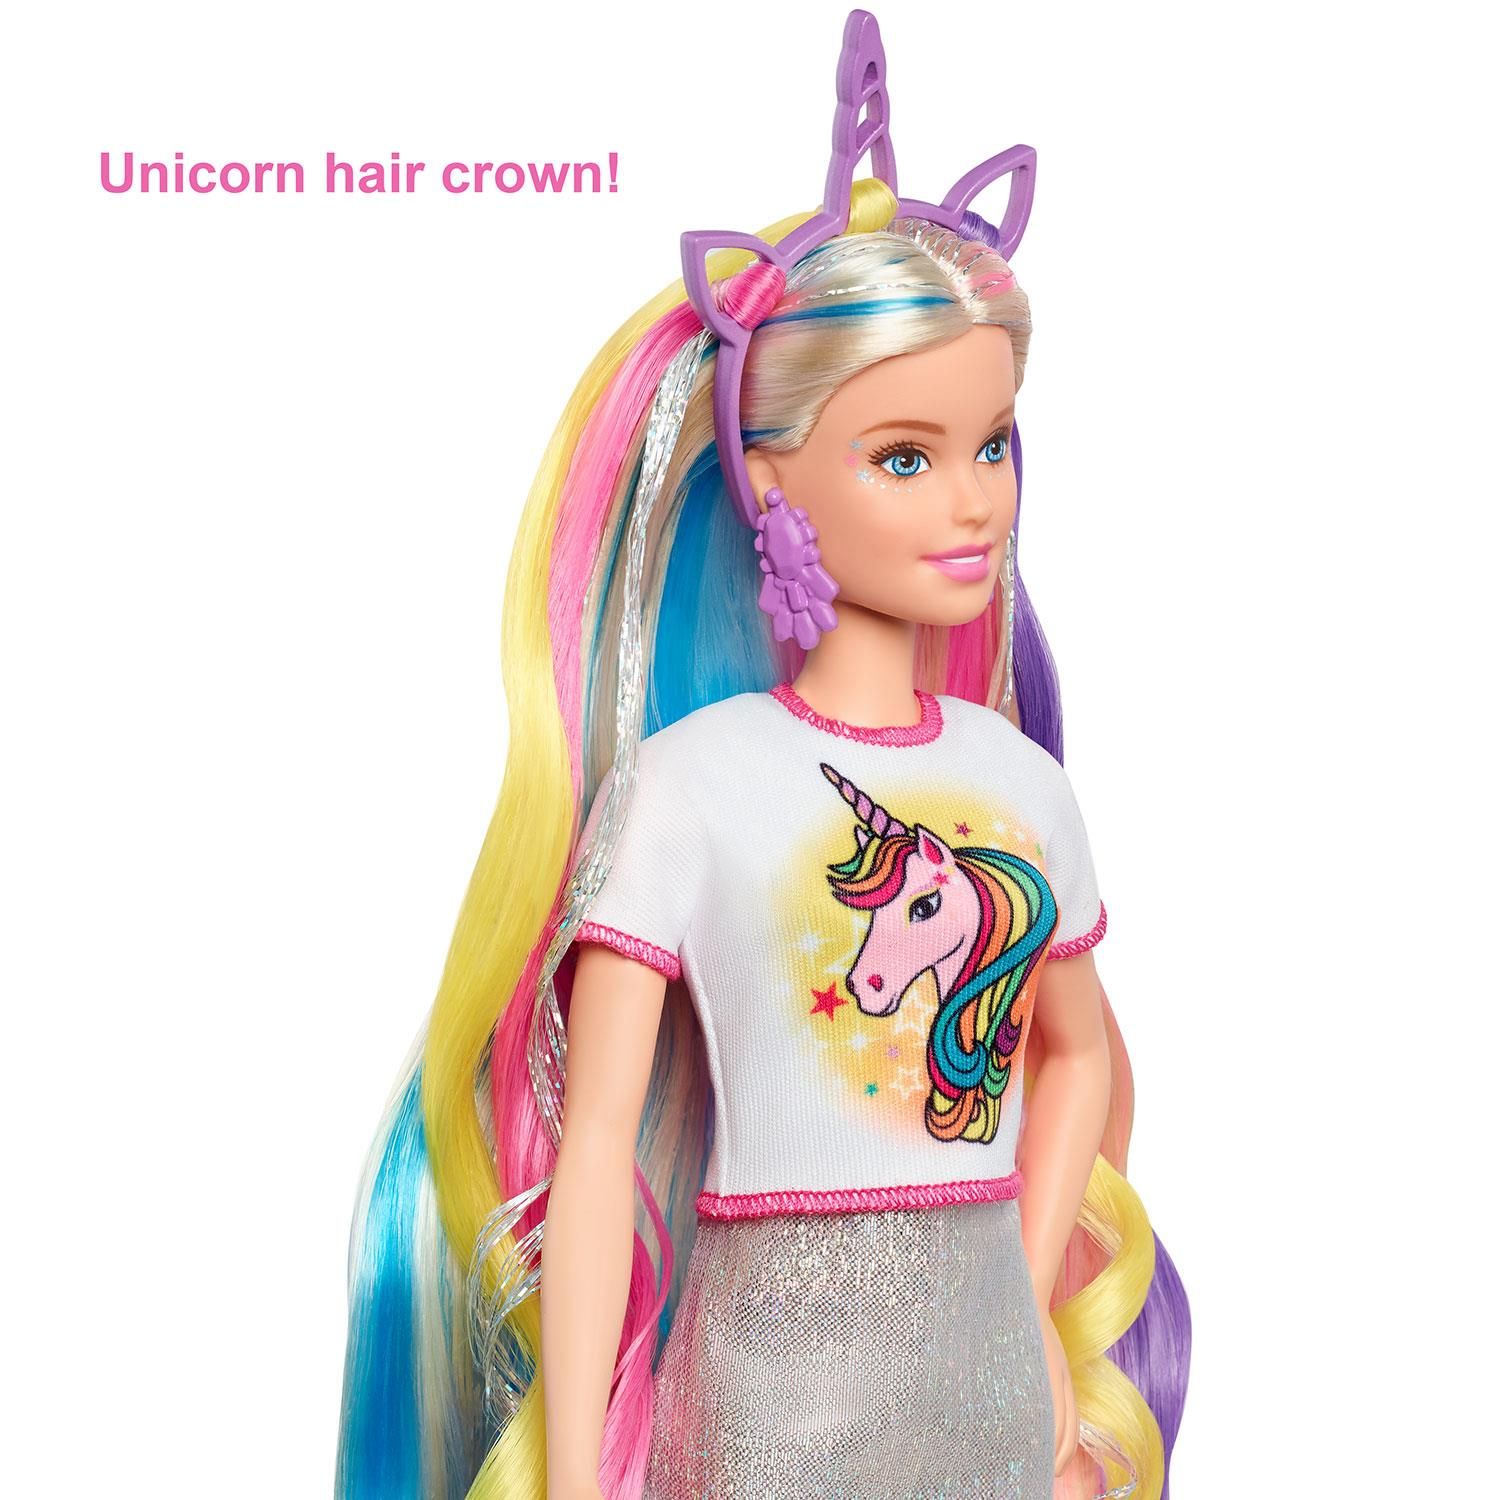 Barbie Fantasy Hair Doll with Mermaid and Unicorn Accessories

Create a magical unicorn or mermaid Barbie with the Barbie Fantasy Hair doll. This Barbie doll comes with two beautiful fantasy looks, with crowns, colourful extensions and themed tops to transform Barbie(C) into a unicorn or mermaid. Barbie’s blonde hair will glow with other bright colours, and kids can use the hairbands, clips and hairbrush included to create a Barbie Fantasy Hair doll of their own. Kids aged 3+ will love dressing up Barbie and making her shine! Doll cannot stand alone. Colours and styles may vary.

Features:

Barbie Fantasy Hair Doll comes with two different fantastical looks and accessories – to make either a unicorn or mermaid Barbie.
Dress the Barbie doll with the mermaid top, and add the mermaid hair crown of seashells, starfishes and elegant long teal extensions to brighten her blonde hair.
Or turn mermaid Barbie into a unicorn with the unicorn rainbow T-shirt, crown and colourful hair extensions in purple, yellow and pink.
Use the hair clips, bands and brush to style Barbie’s long, vibrant and glitter-streaked hair for an even more fantastical look.
Accessorise the Barbie party dress with silver heels or pink trainers, and purple drop earrings.

Specifications:

Type: Doll Set
Colour: Multicolour
Age Range: 3 to 7 Years
Material: Abs Plastic

Package Includes: Barbie Fantasy Hair Doll with Mermaid and Unicorn Accessories